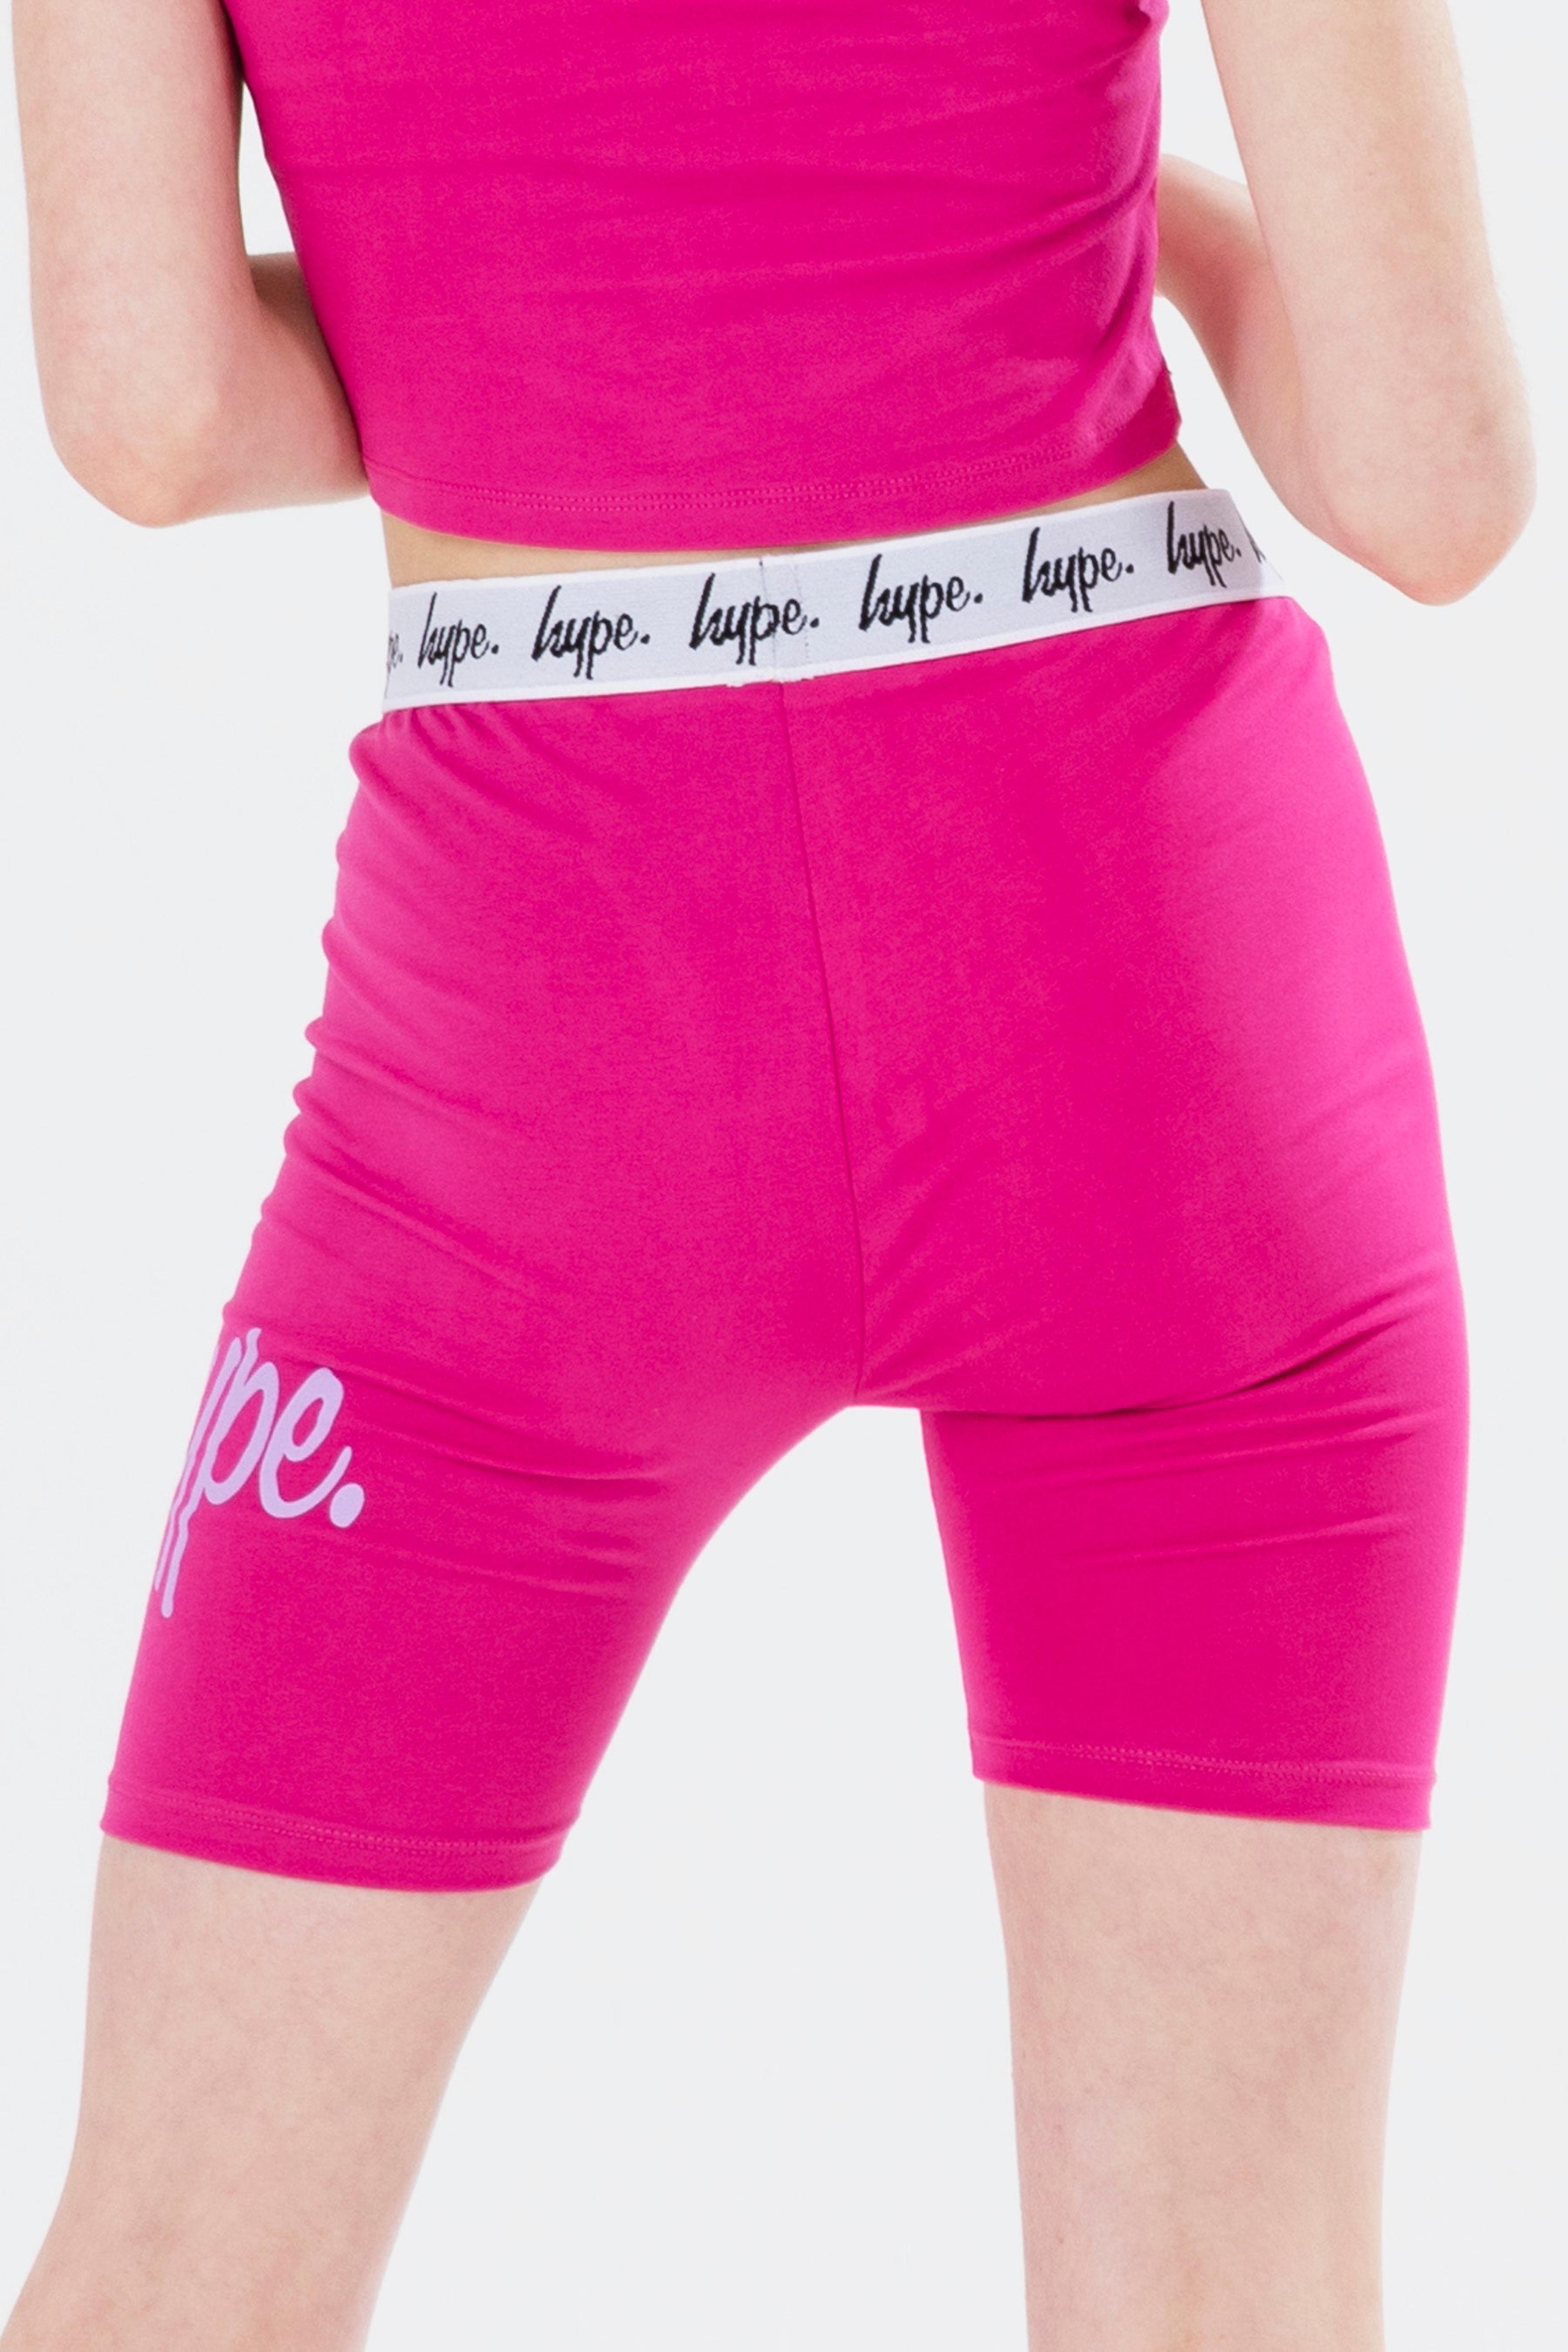 Alternate View 1 of HYPE GIRLS BERRY SCRIPT CYCLING SHORTS